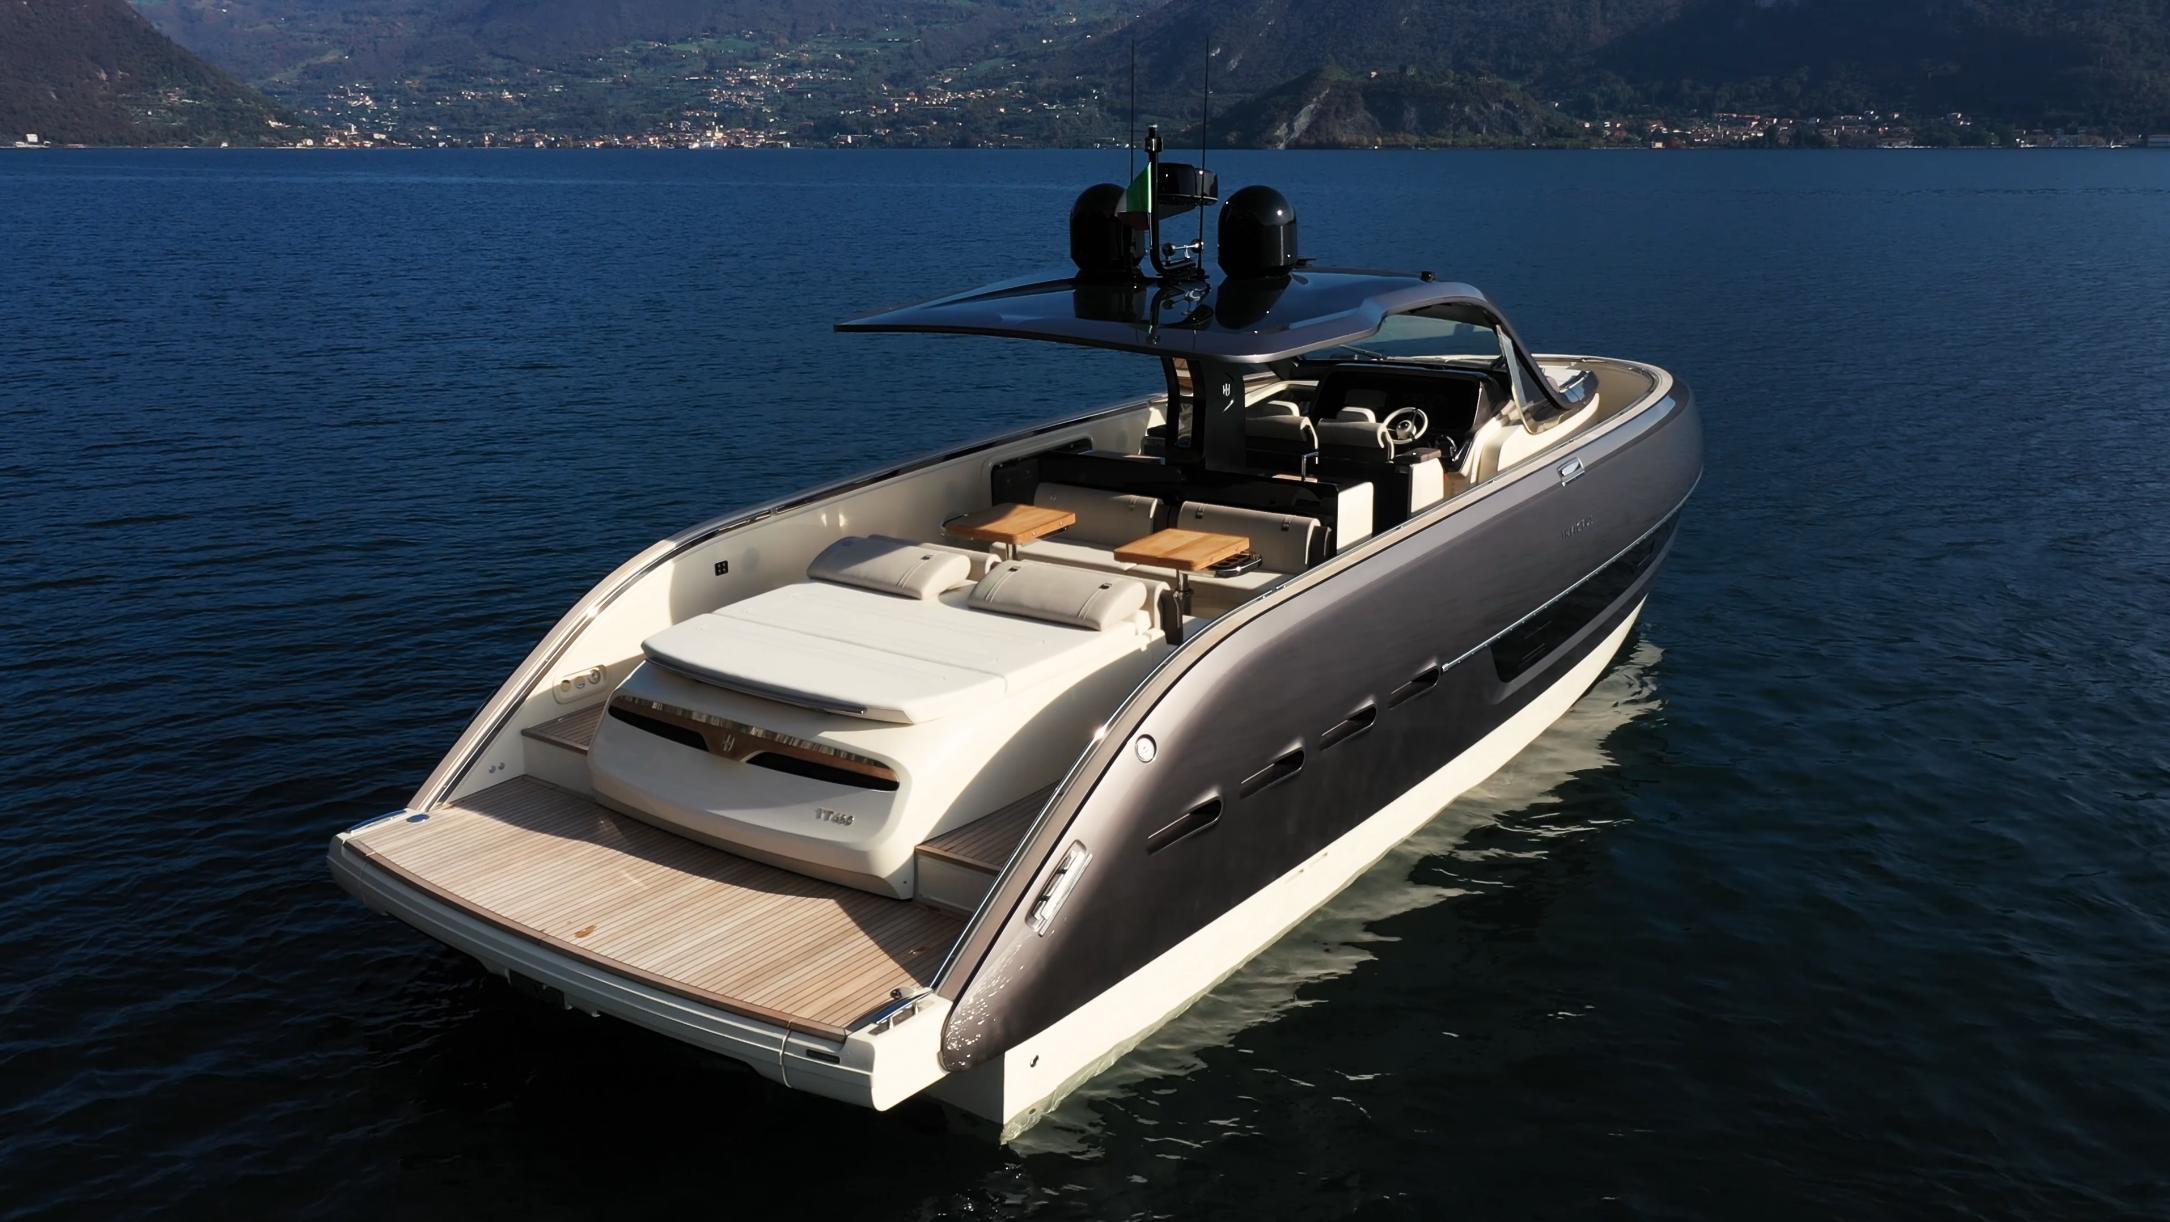 2022 Invictus TT460 Boat Review: MIBS Debut Yacht